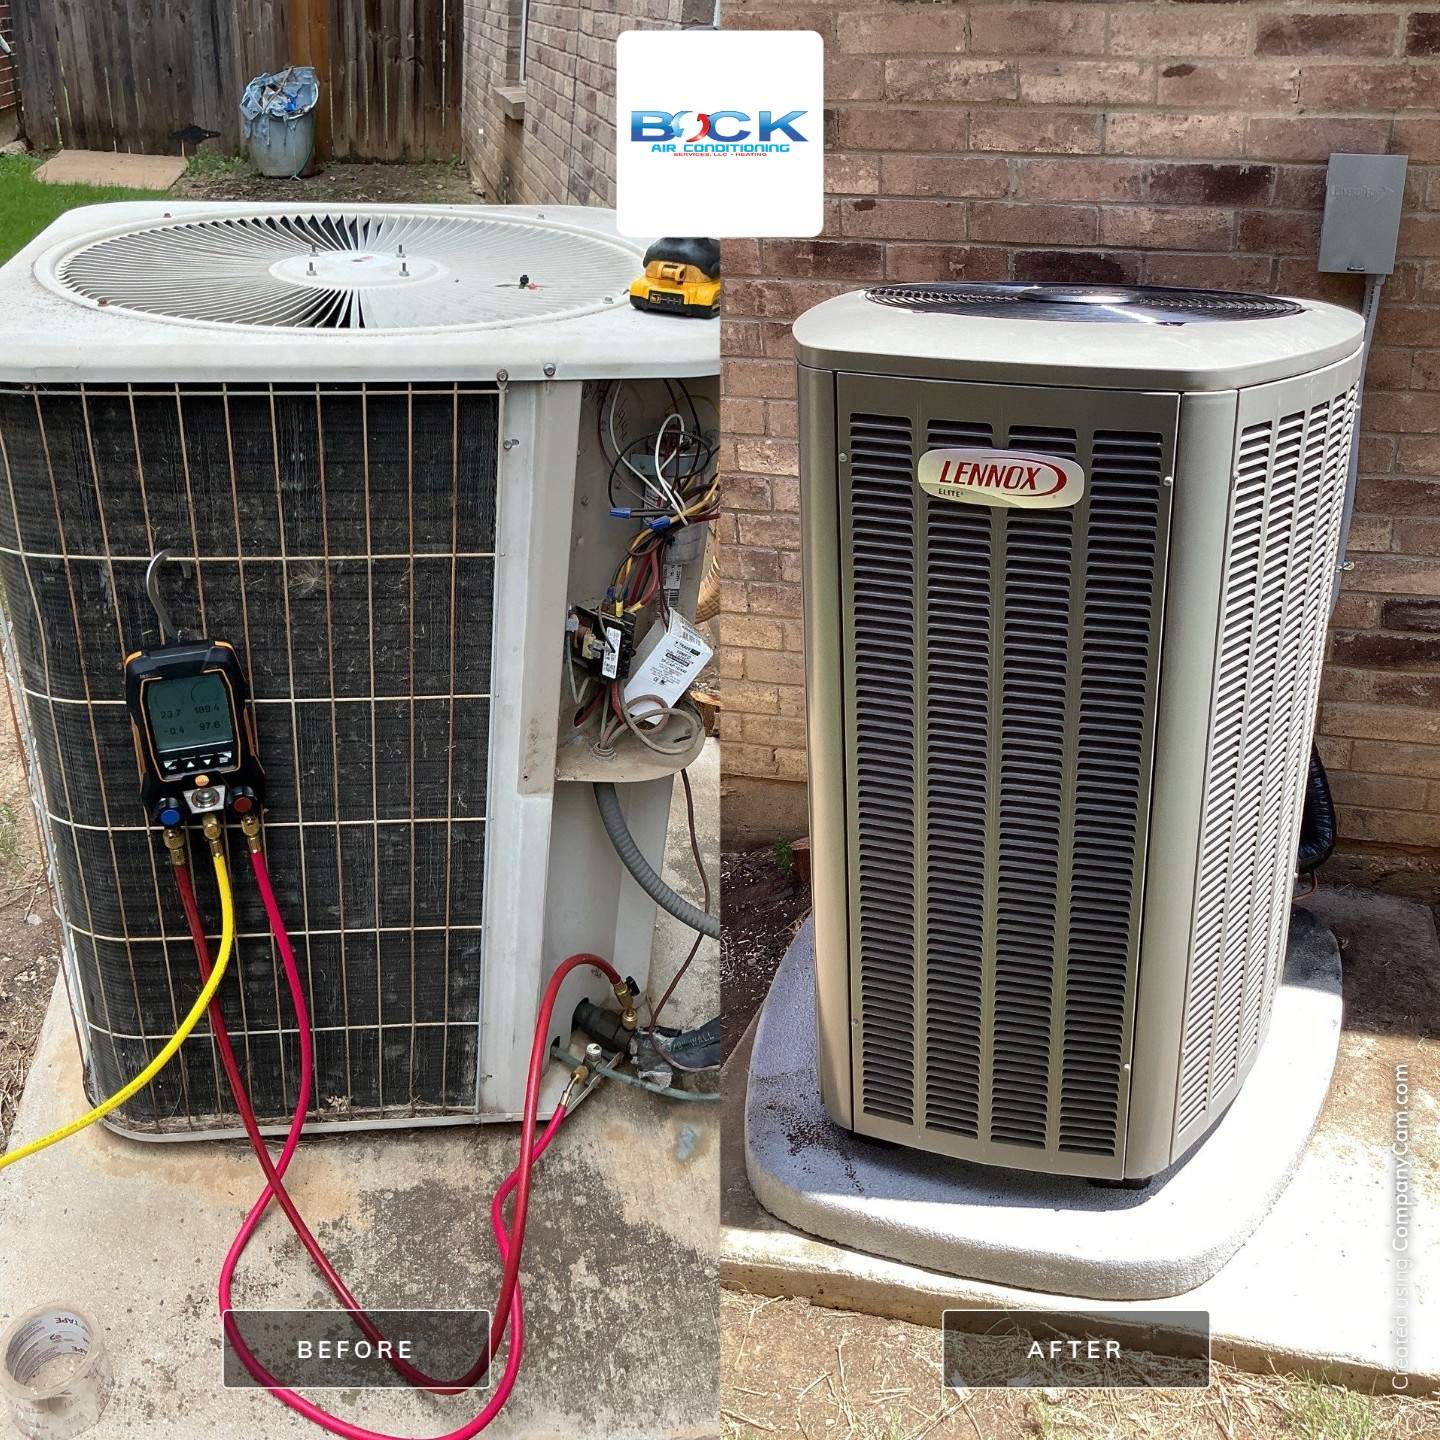 Before and after of condenser.